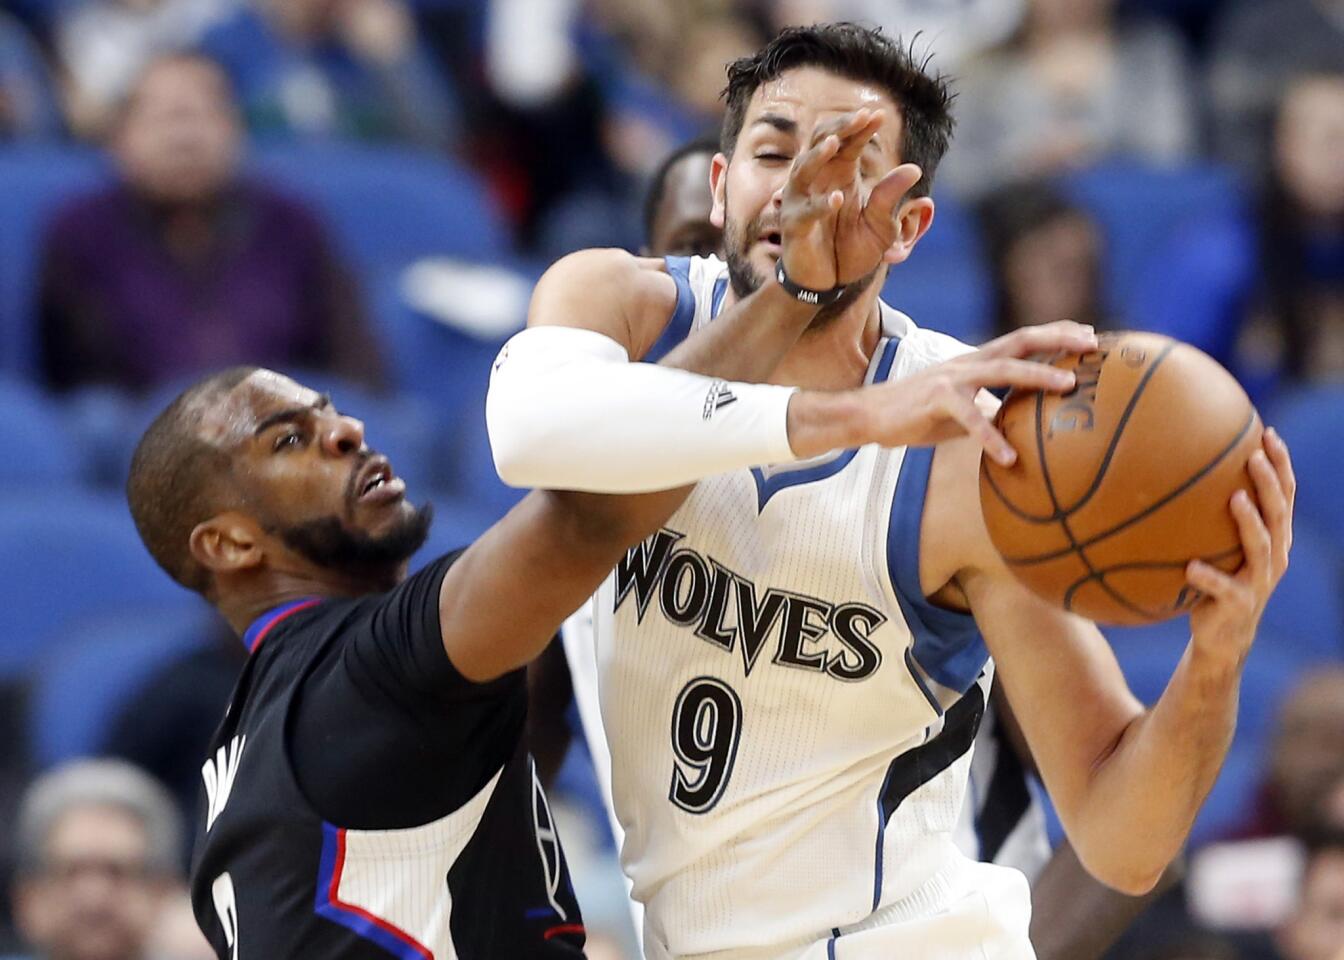 Clippers point guard Chris Paul tries to steal the ball from Timberwolves point guard Ricky Rubio during the first half.